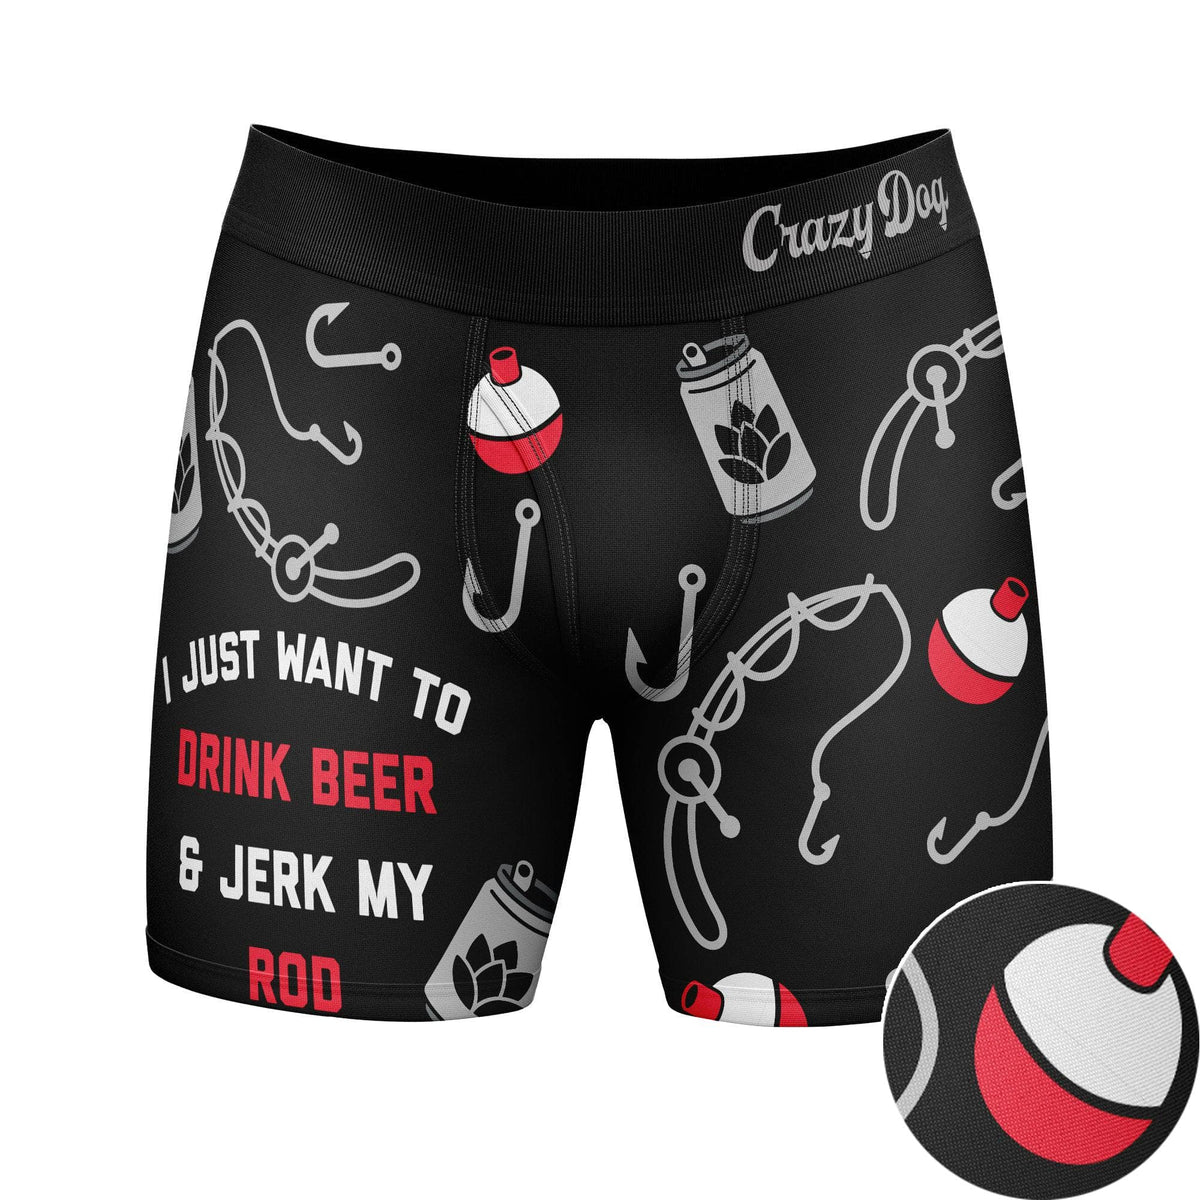 I Just Want To Drink Beer And Jerk My Rod  -  Crazy Dog T-Shirts